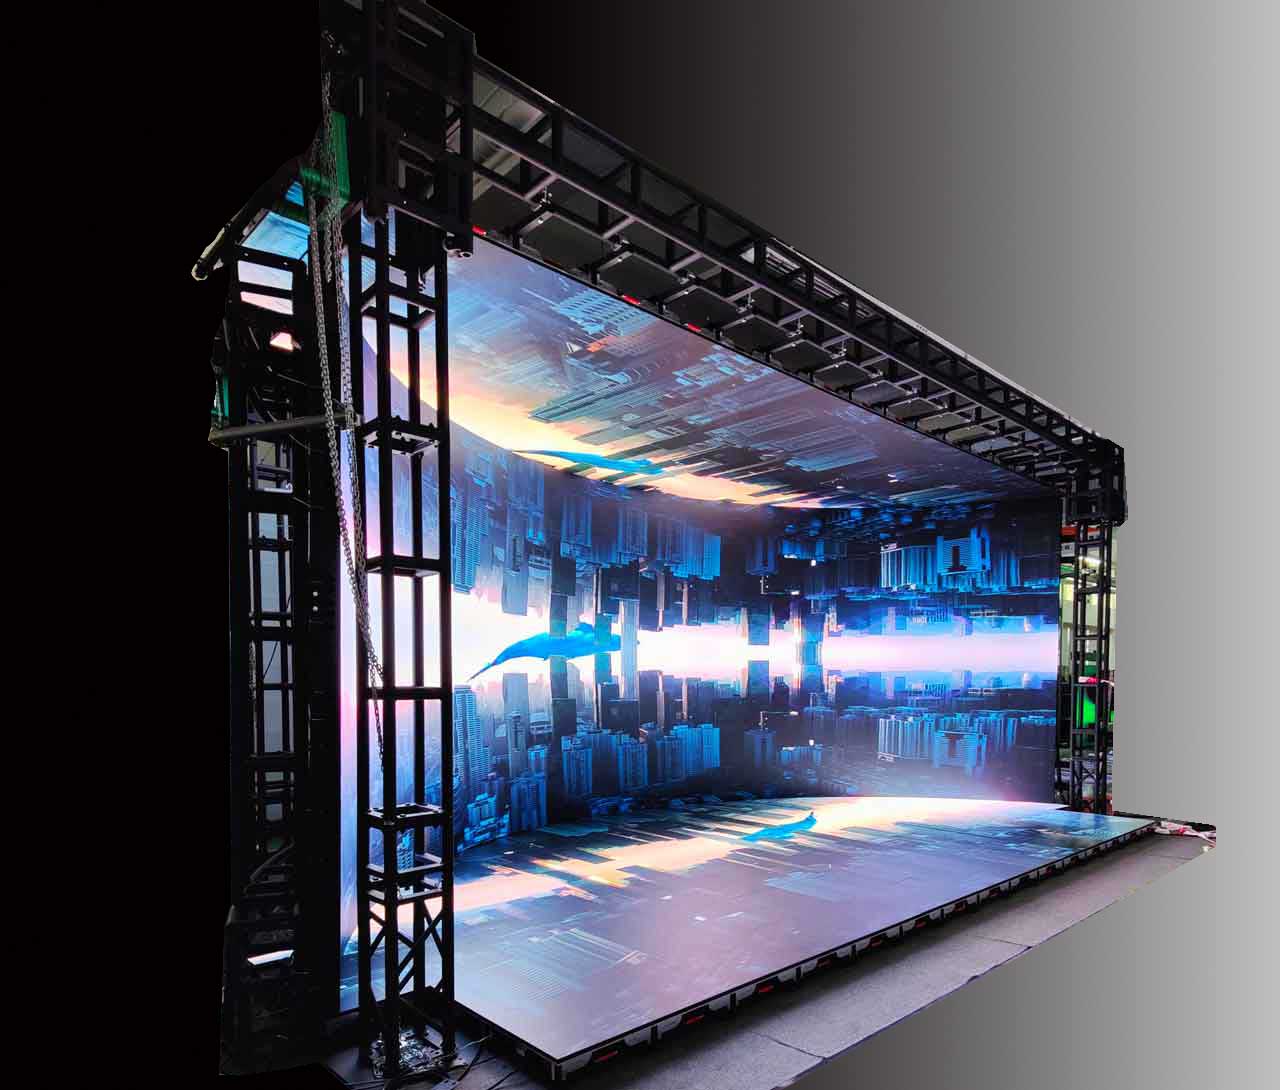 Rental of led screens for events, stages and fairs - LEDLEMON